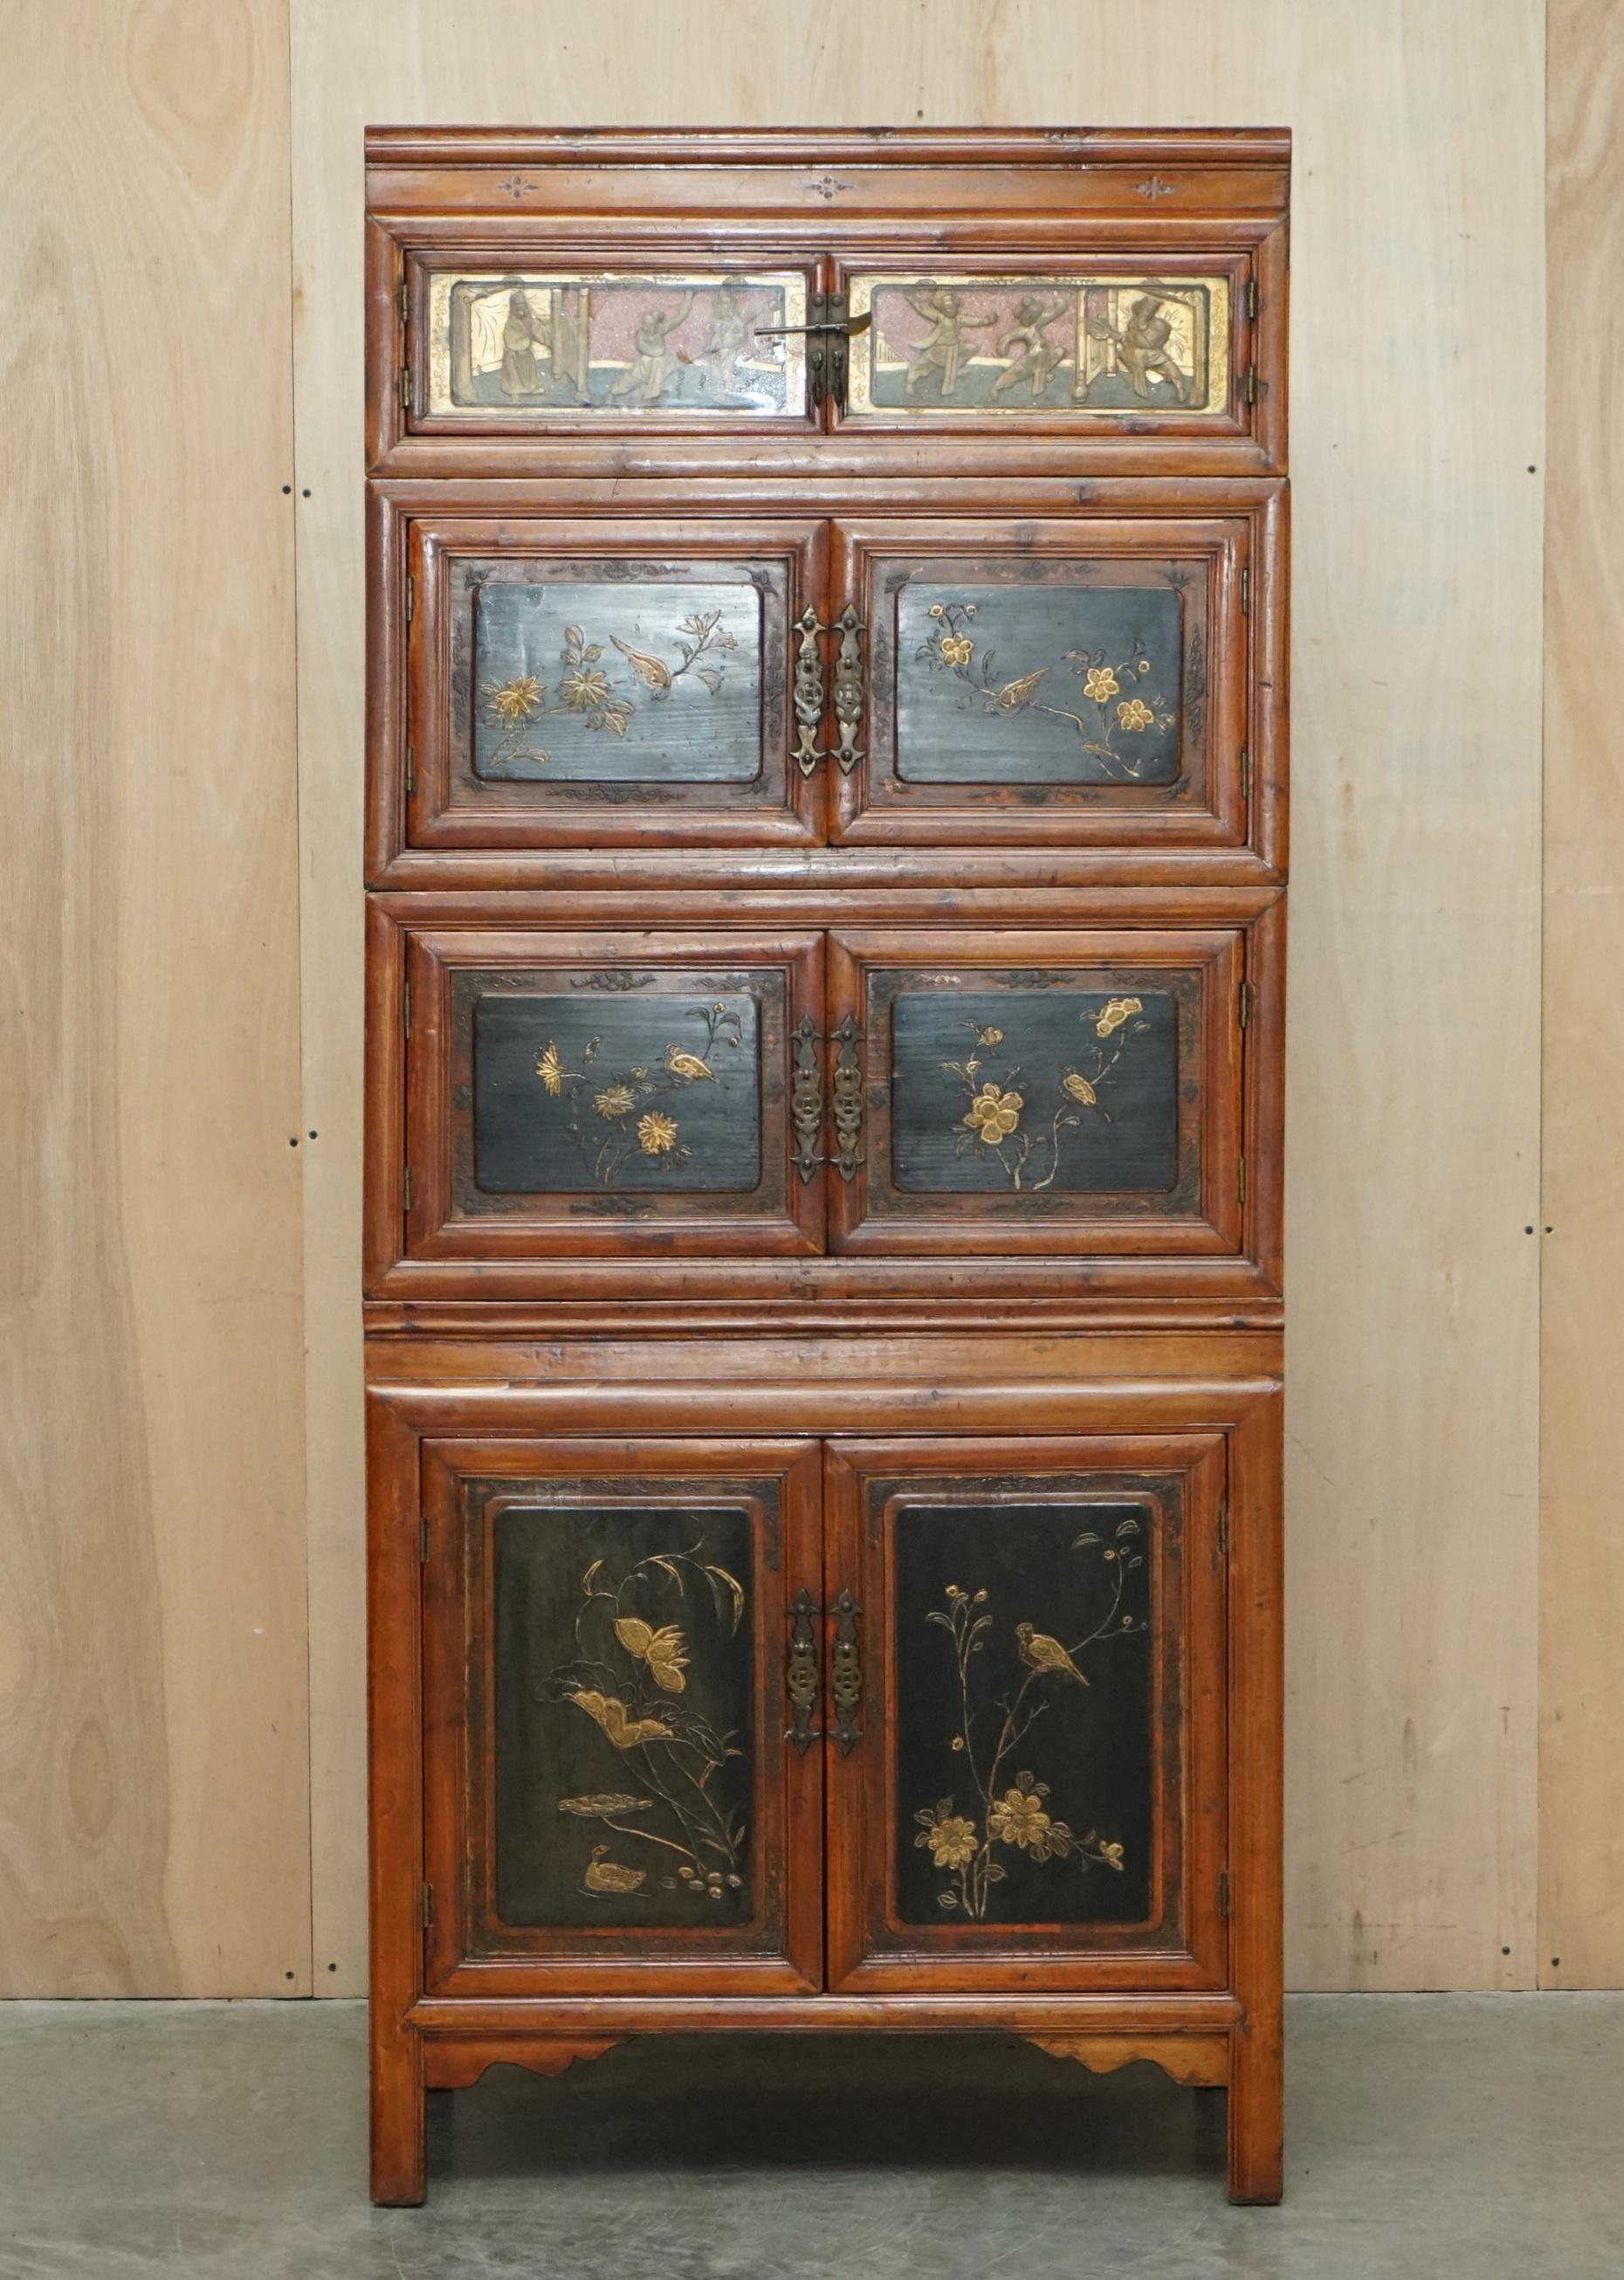 We are delighted to offer for sale this very fine circa 1880 Antique Chinese hand carved stackable compound cupboard with military campaign style side handles

A very rare, important and collectable piece of antique Chinese furniture, this piece